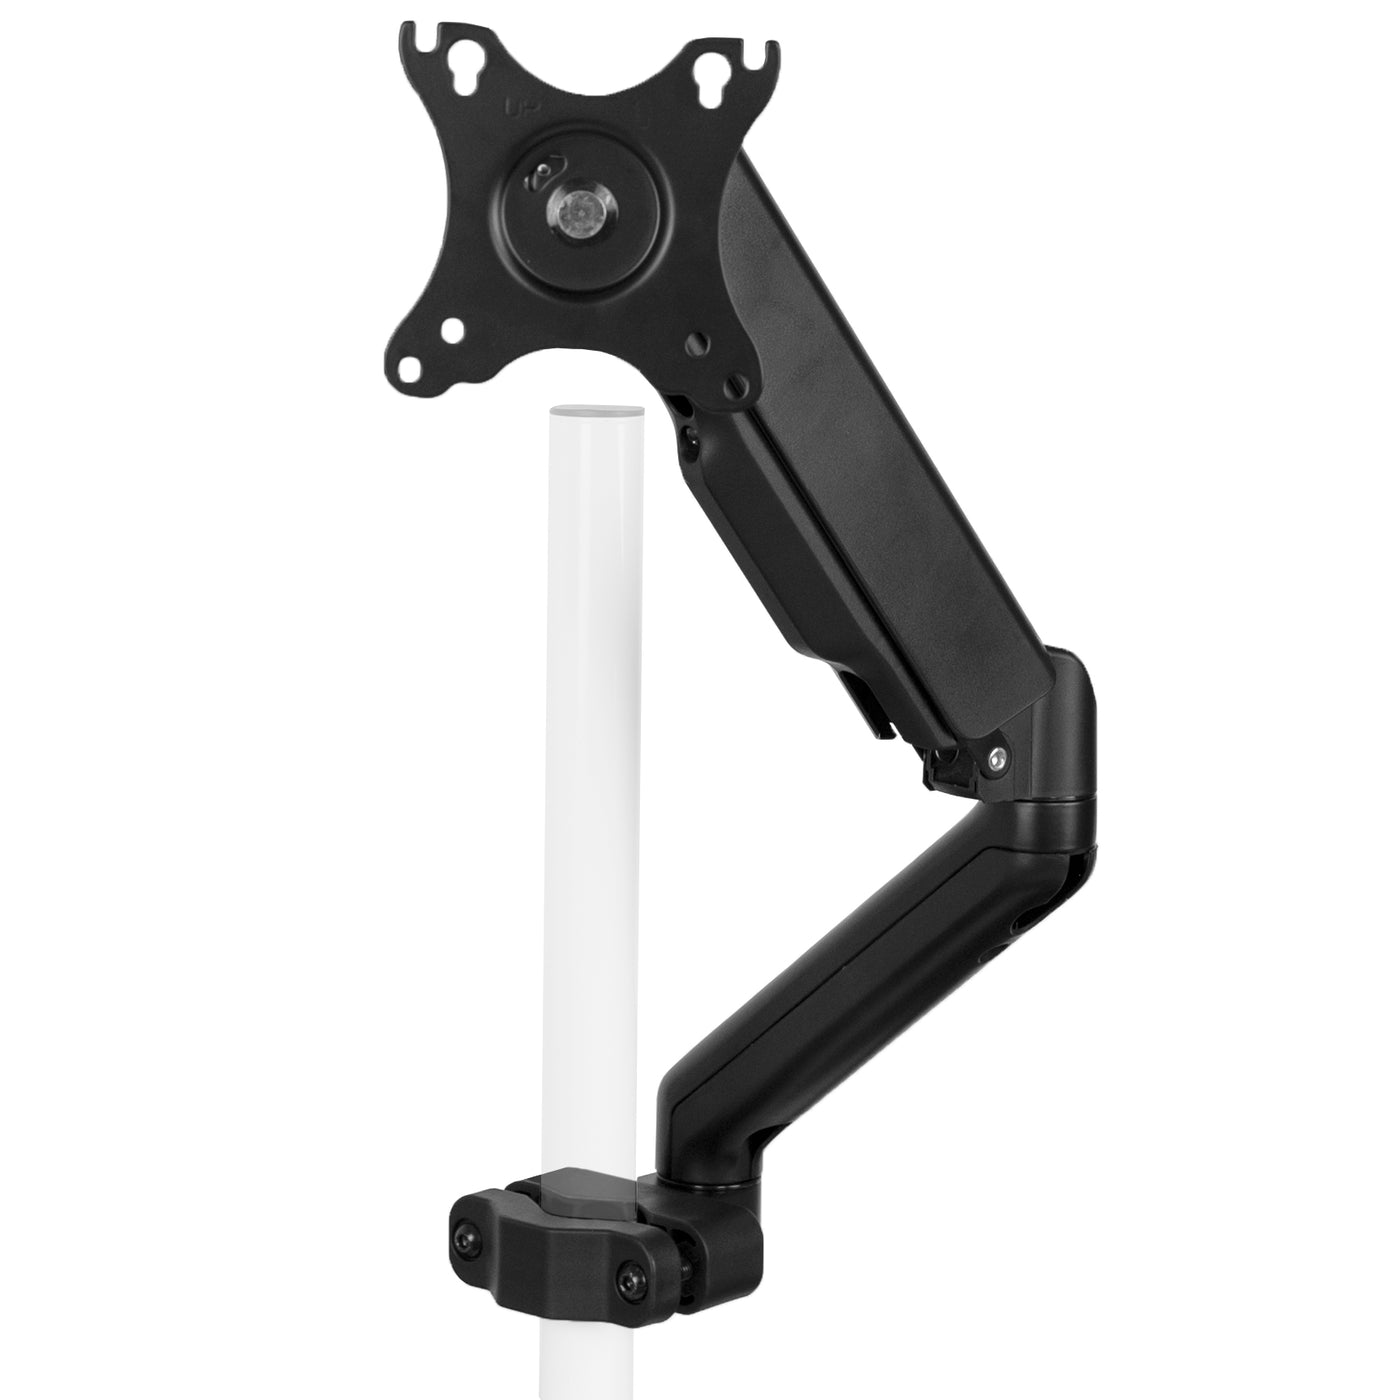 Pneumatic monitor arm for VESA 75x75mm and 100x100mm.